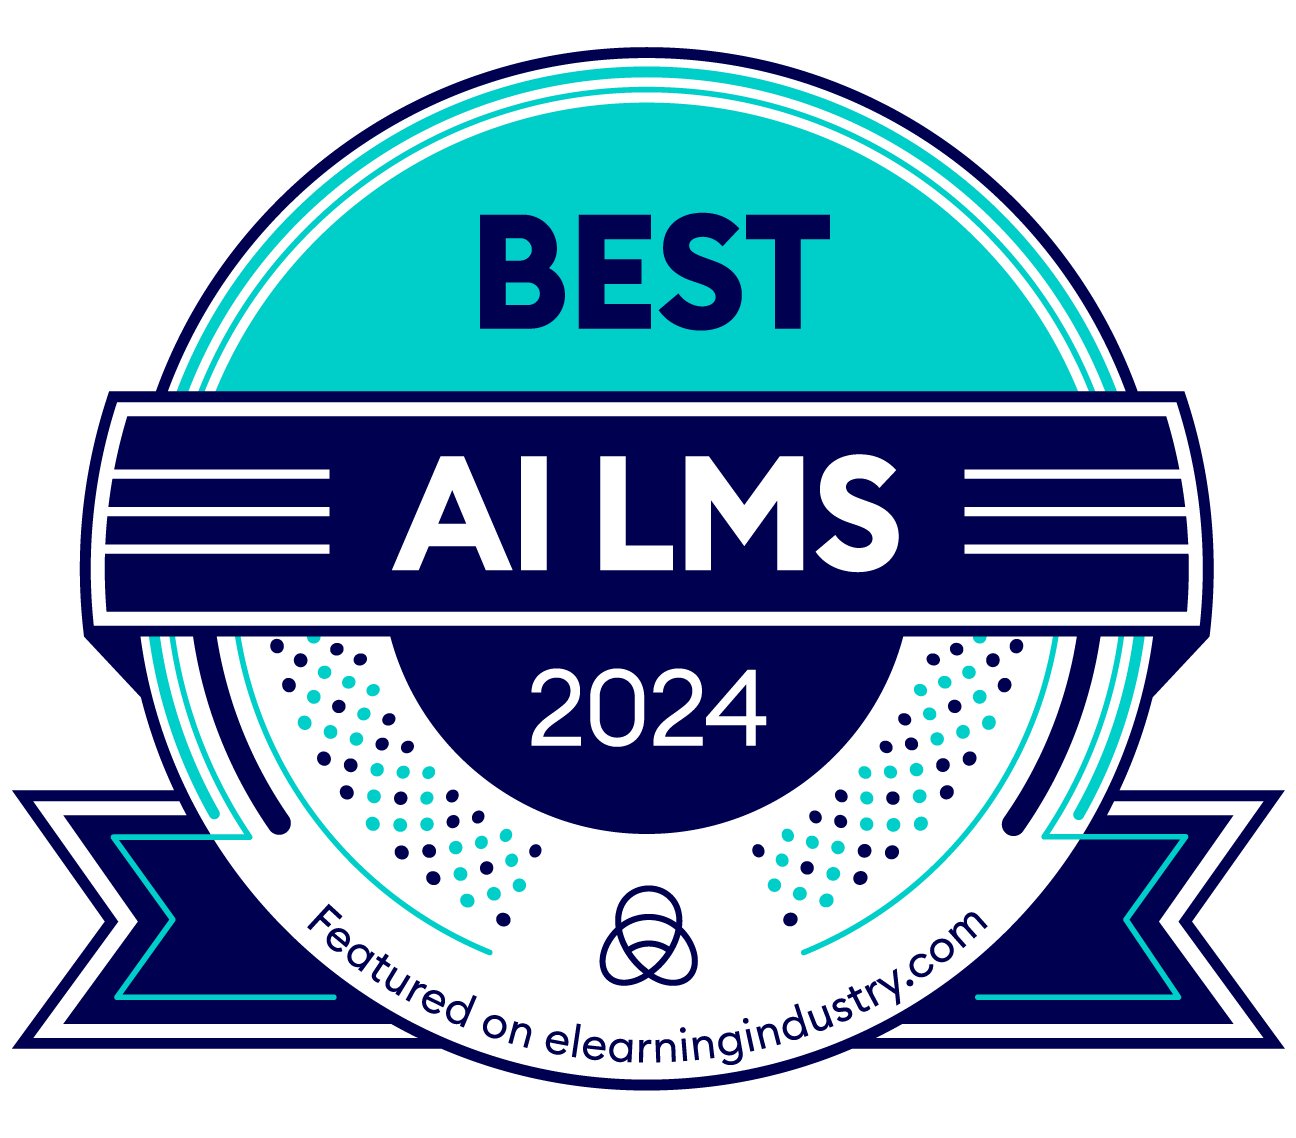 eLearning Industry - Best AI LMS